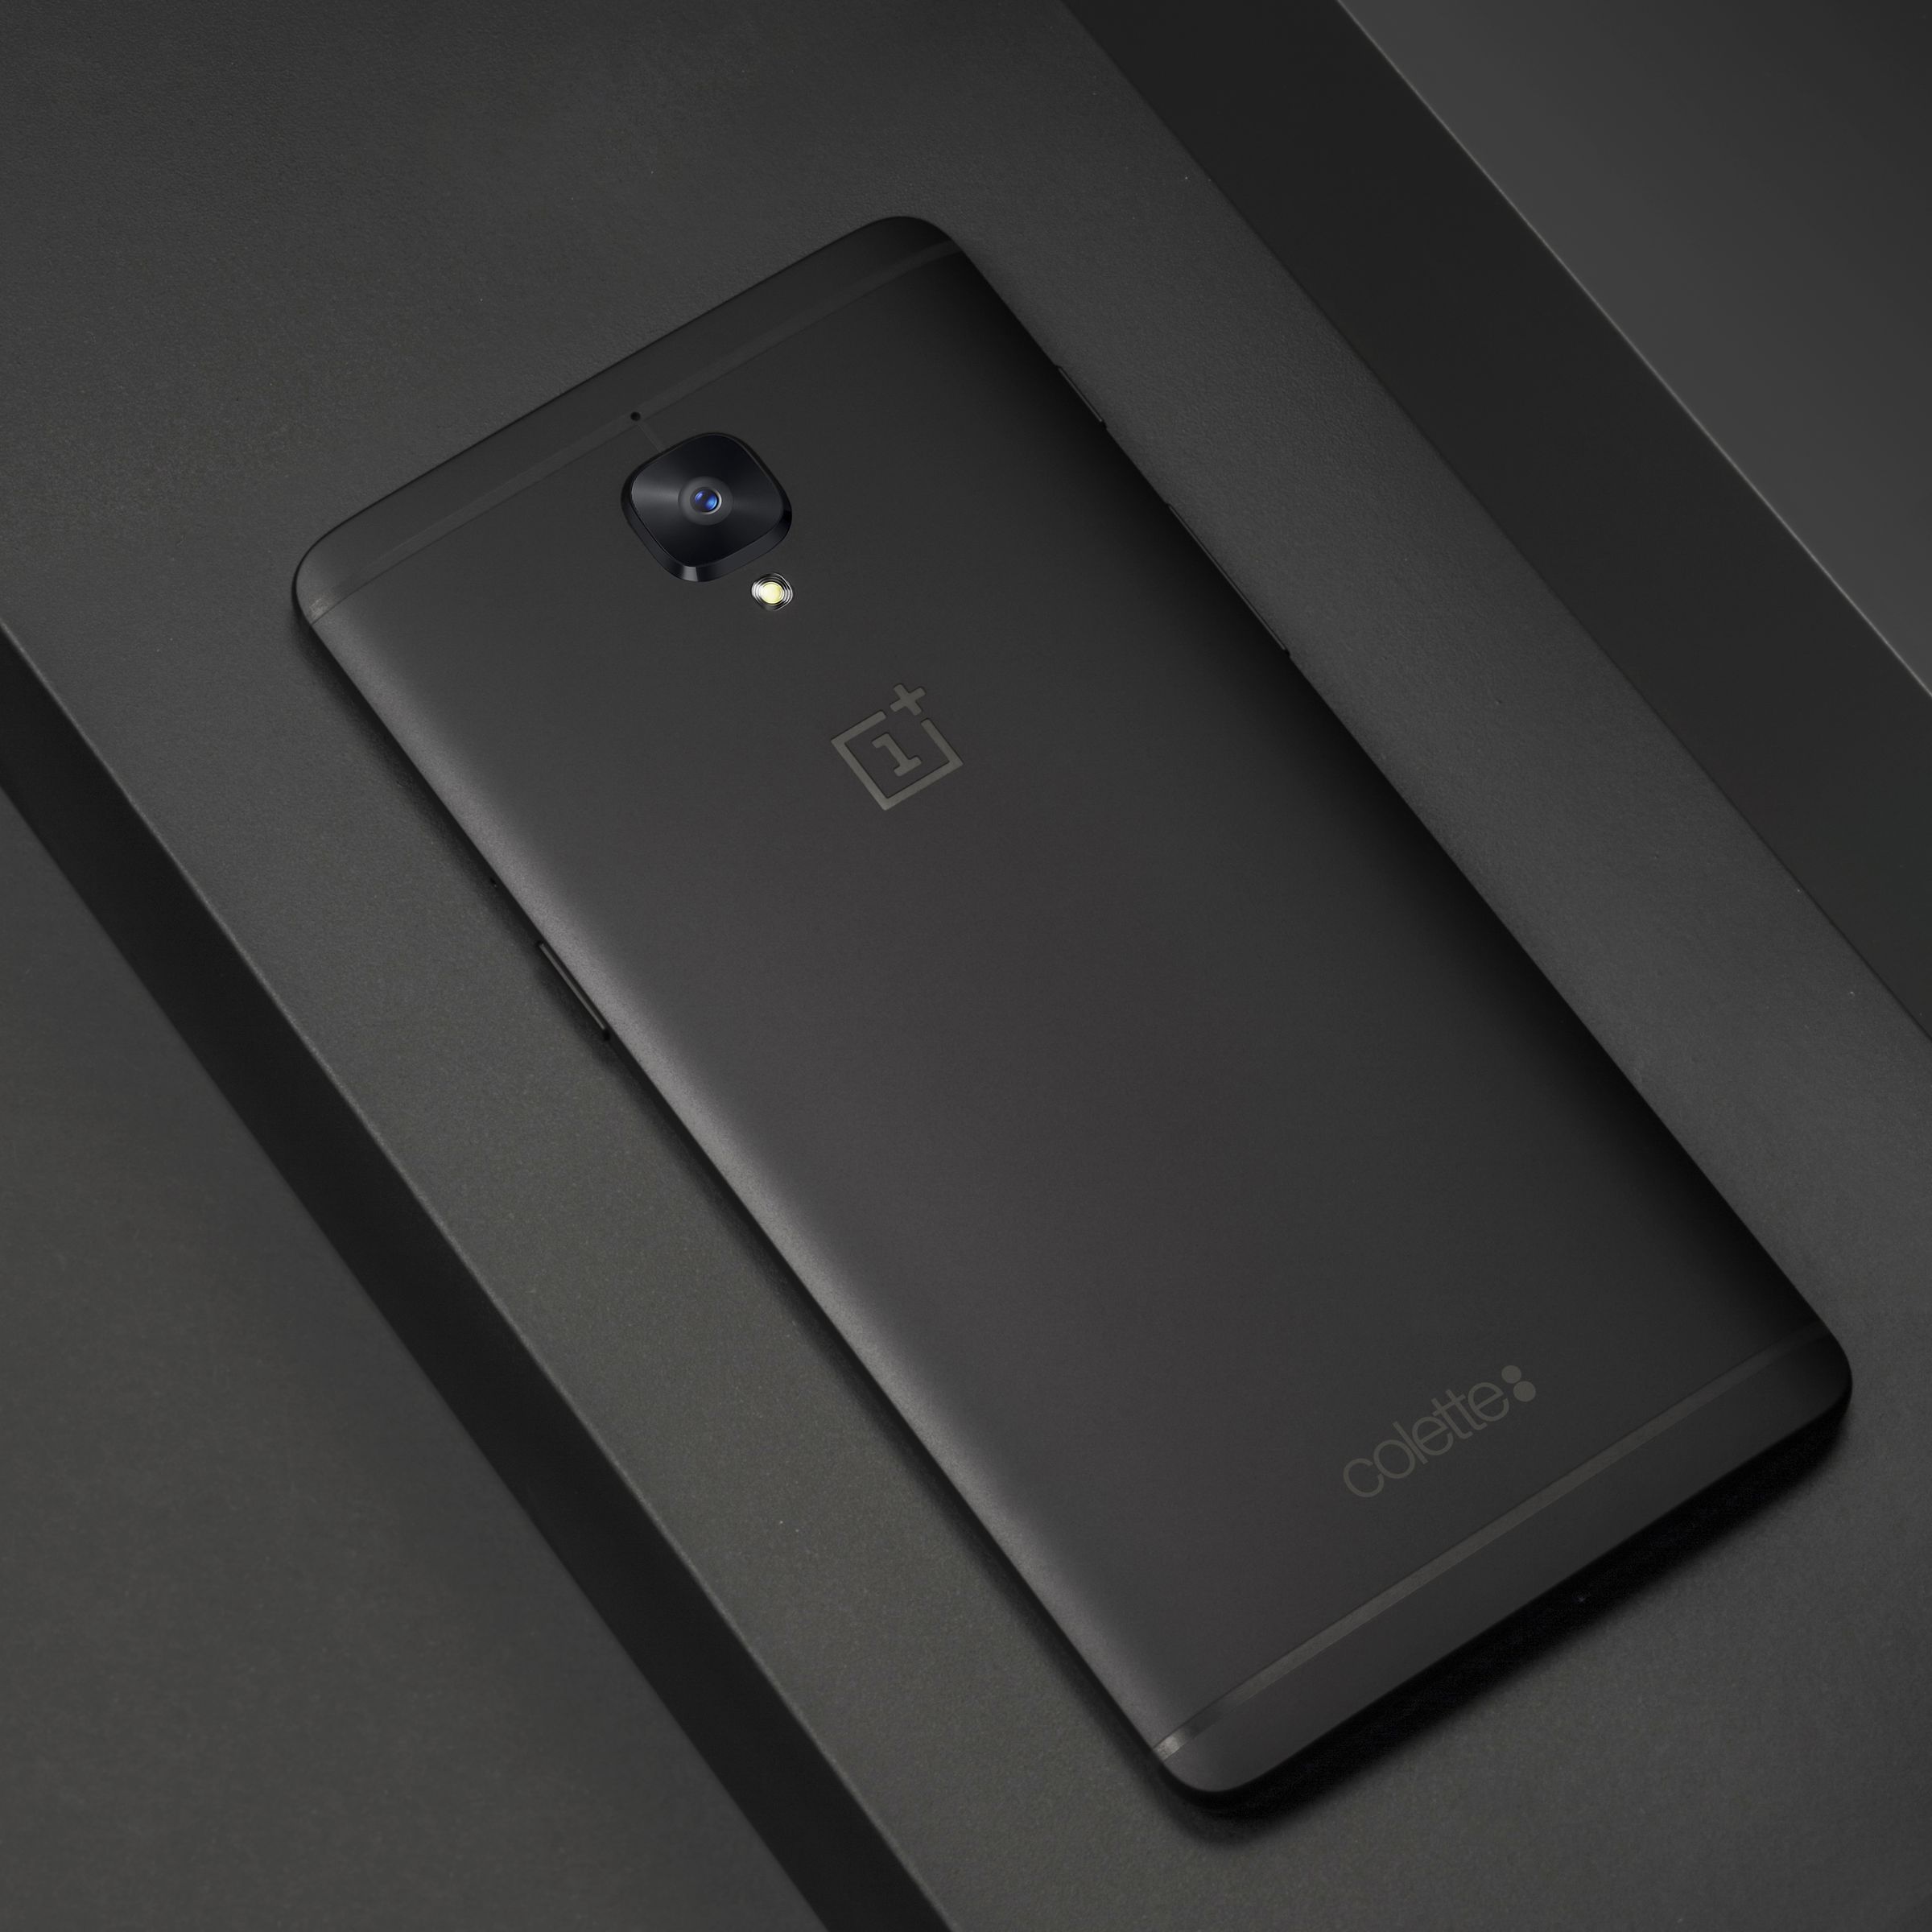 The limited edition OnePlus 3T